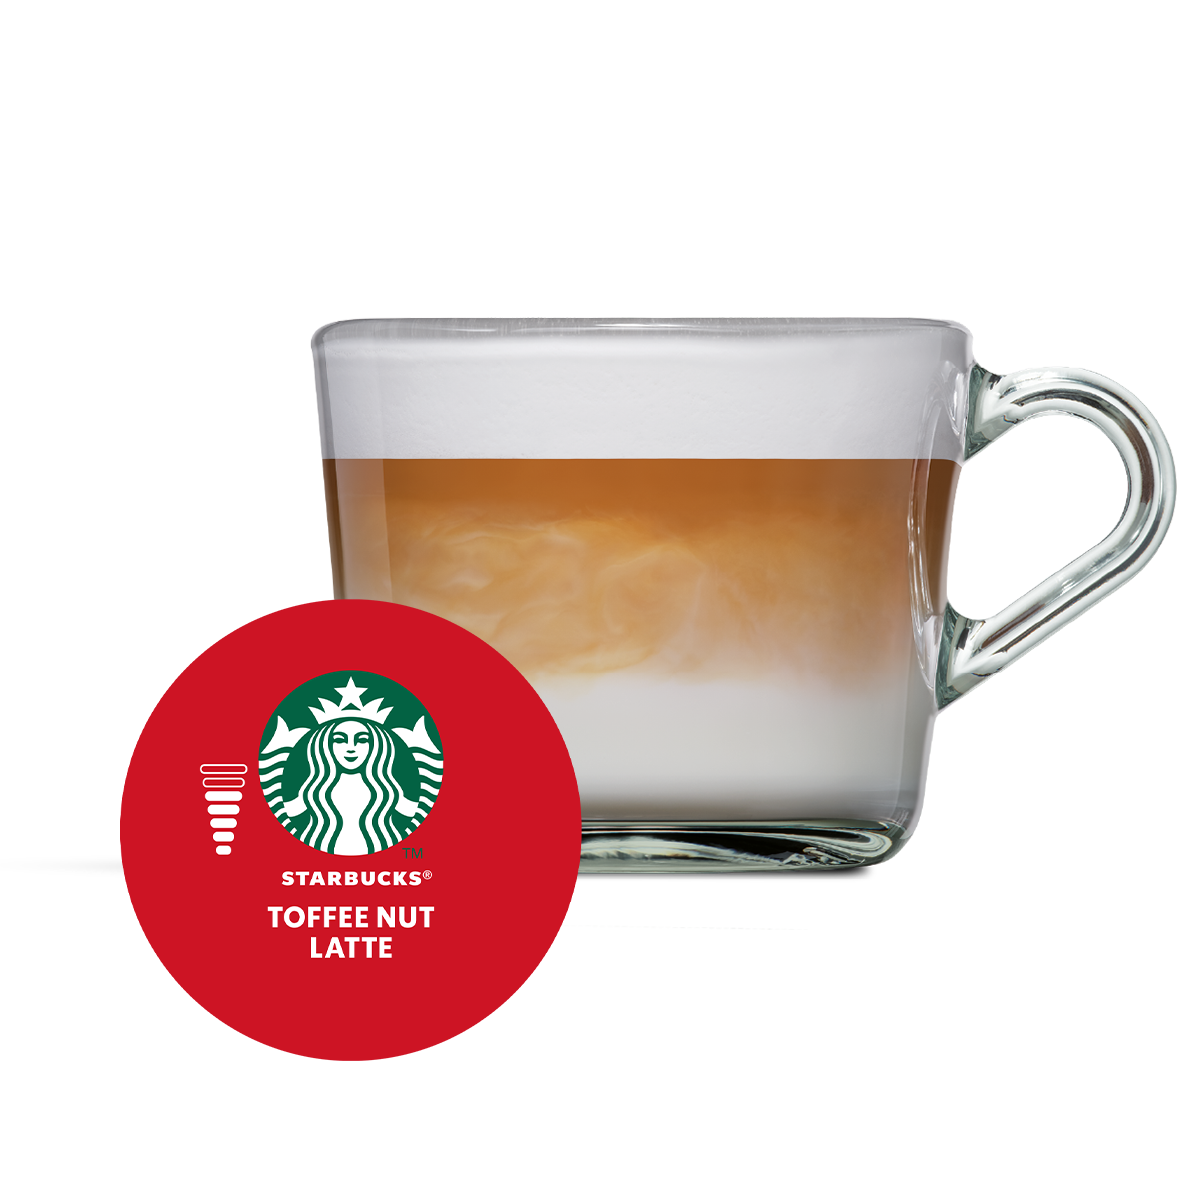 Starbucks Toffee Nut Latte - 12 Capsules pour Dolce Gusto à 4,09 €